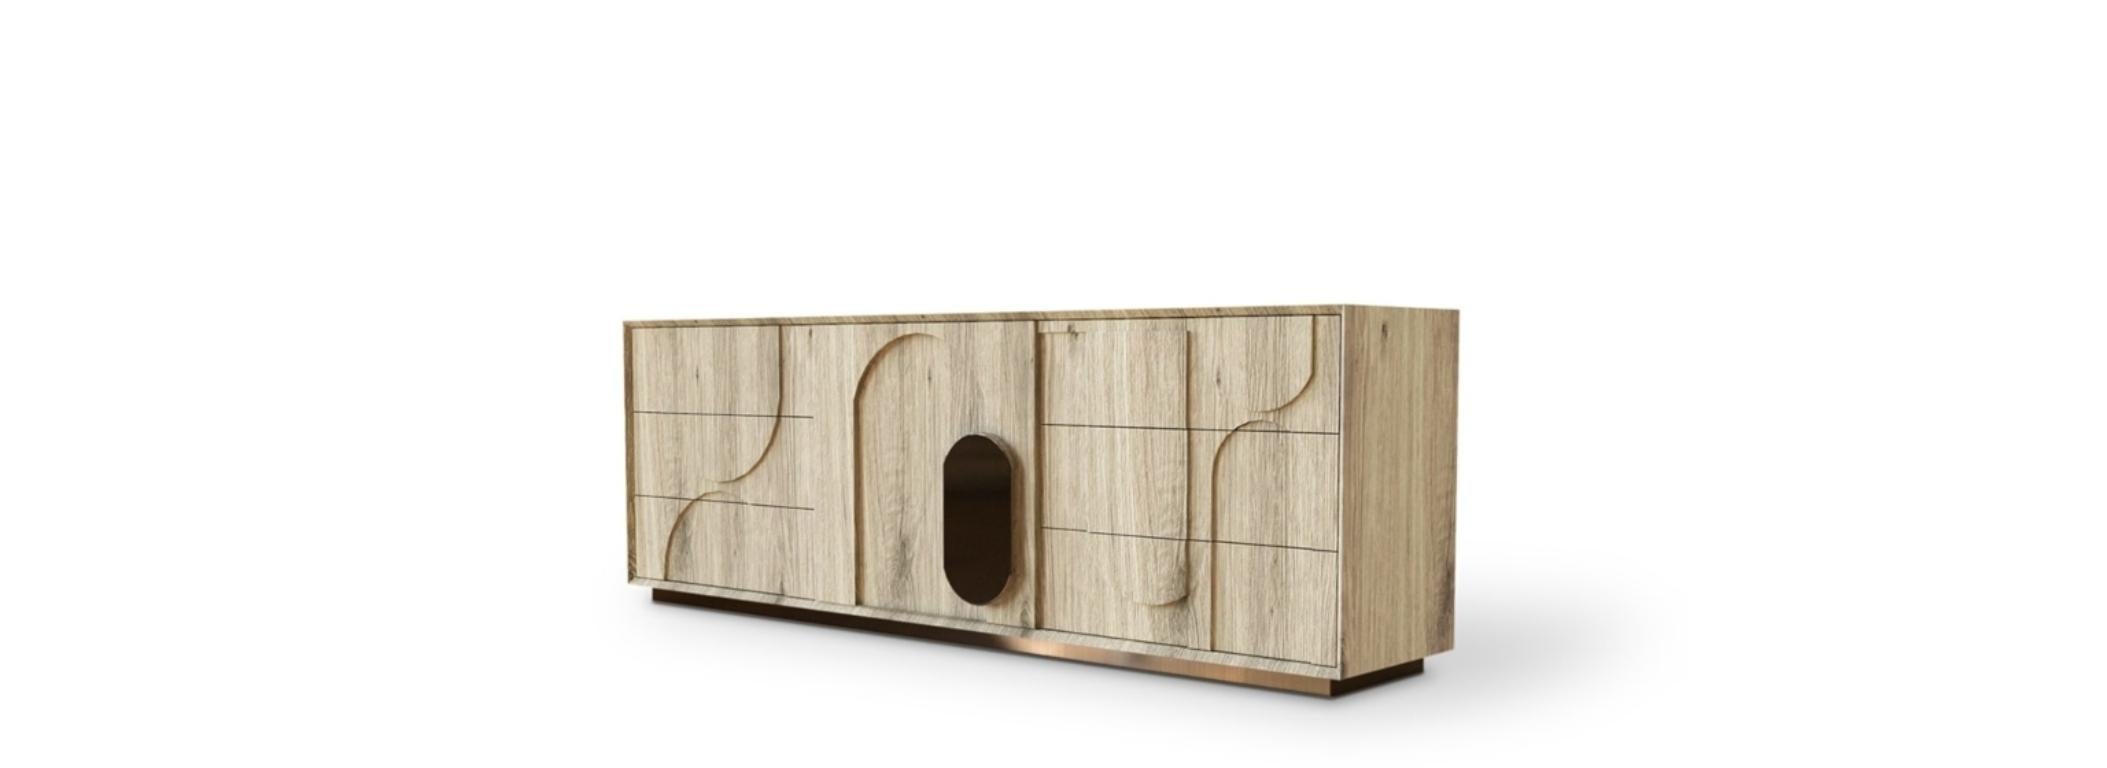 Modern Boma Decape Oak Veneer Sideboard by Caffe Latte In New Condition For Sale In New York, NY